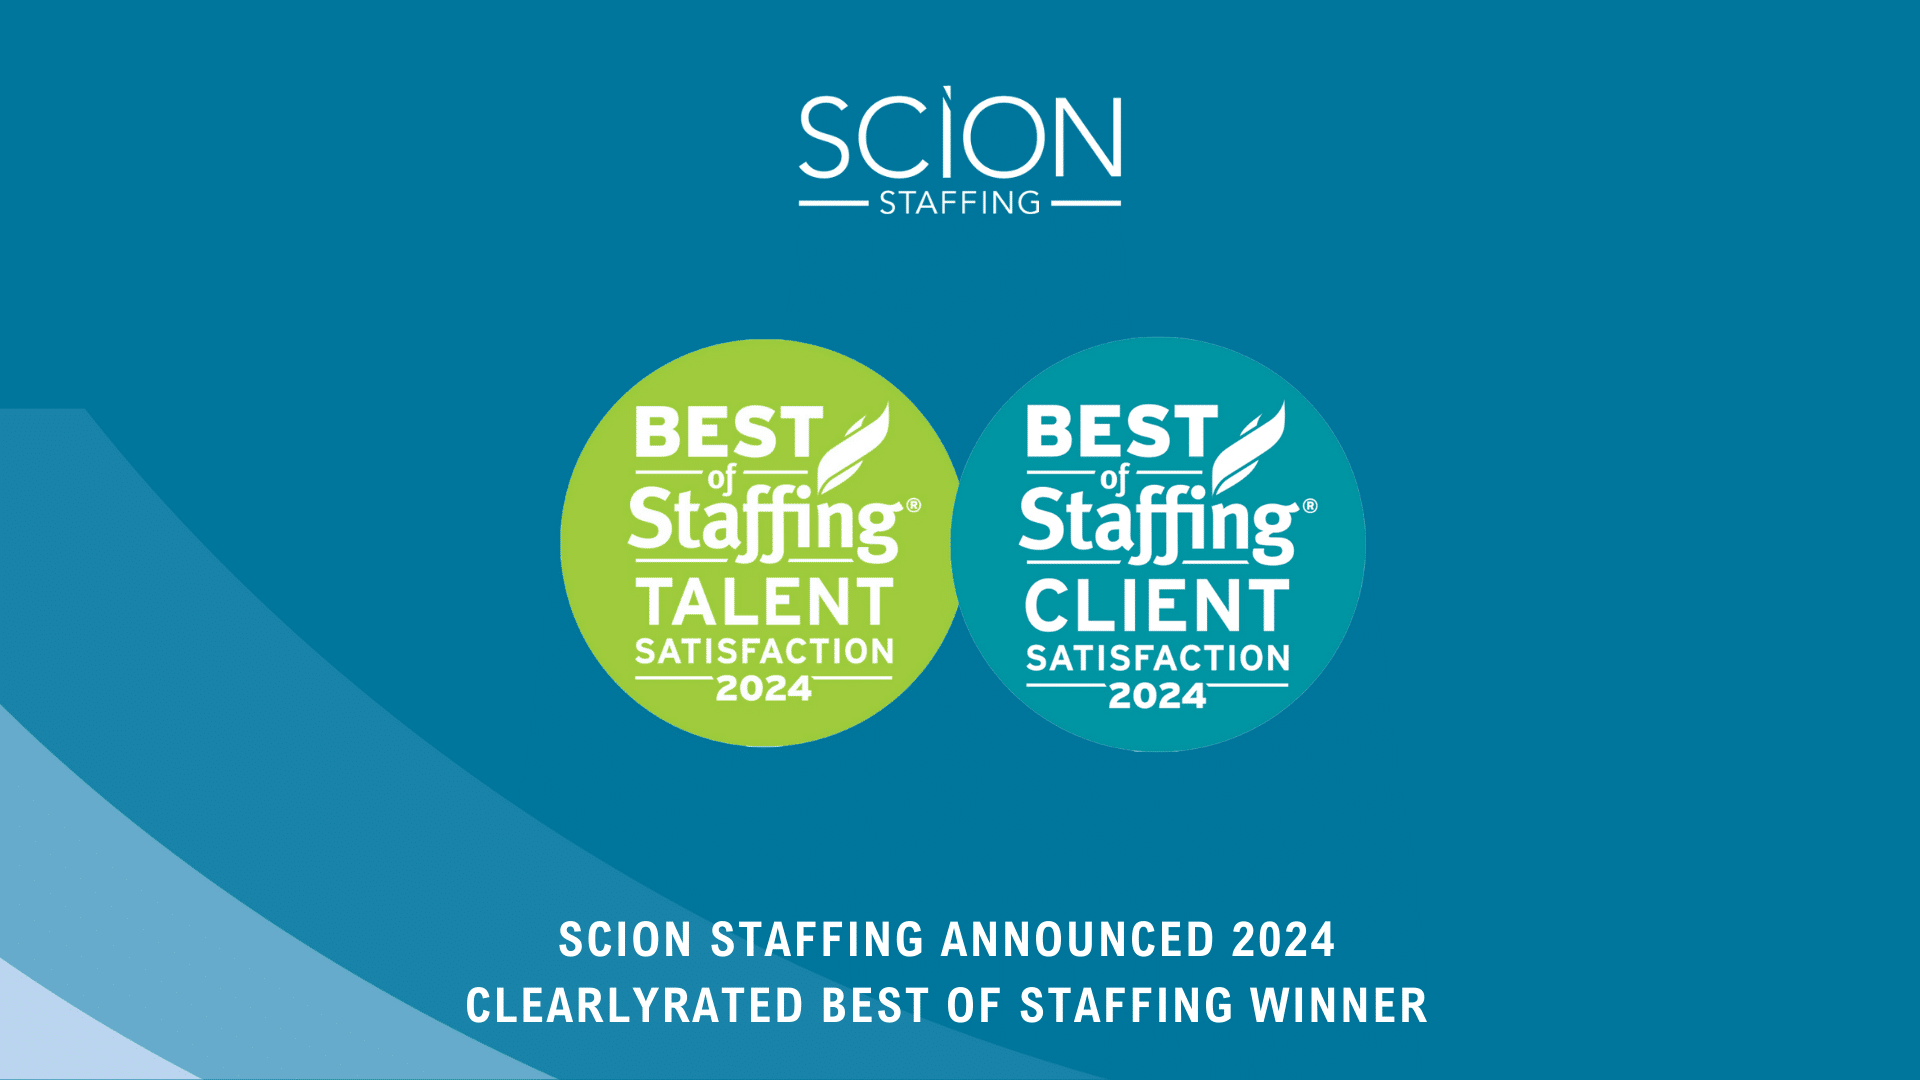 Scion Staffing Announced 2024 Clearlyrated Best of Staffing Winner